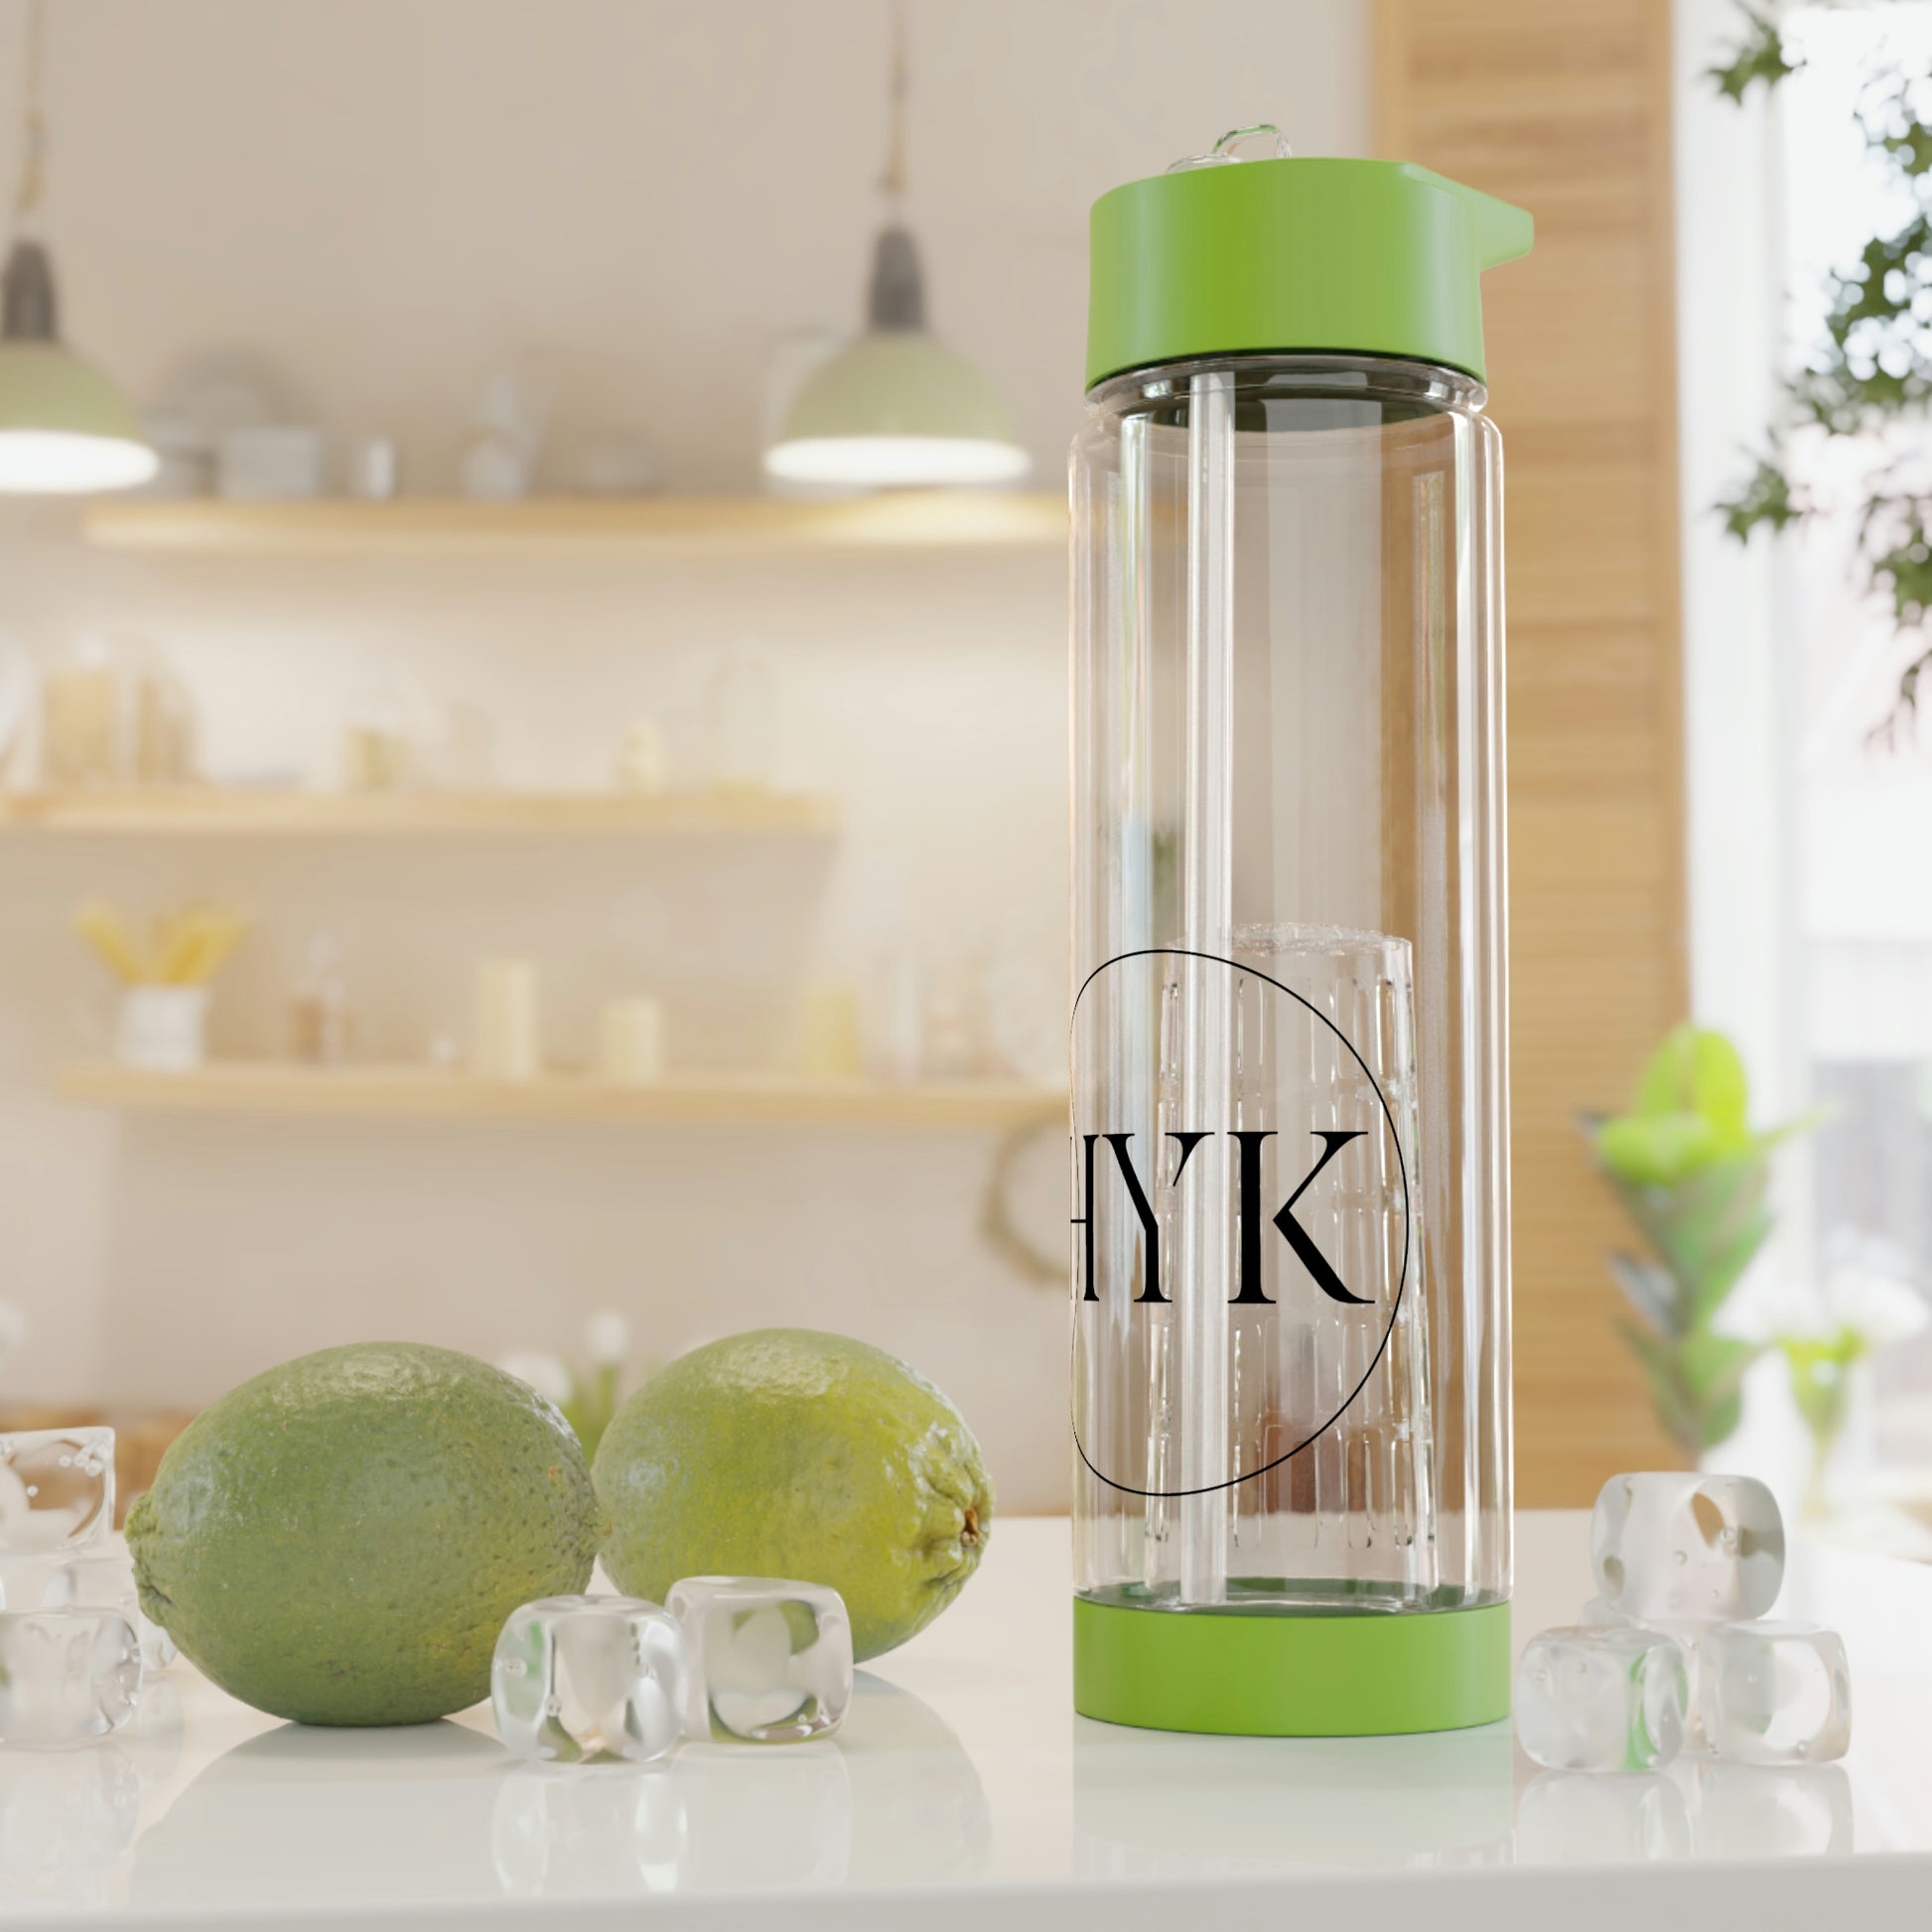 hyk store water infuser bottle for home gym or hiking